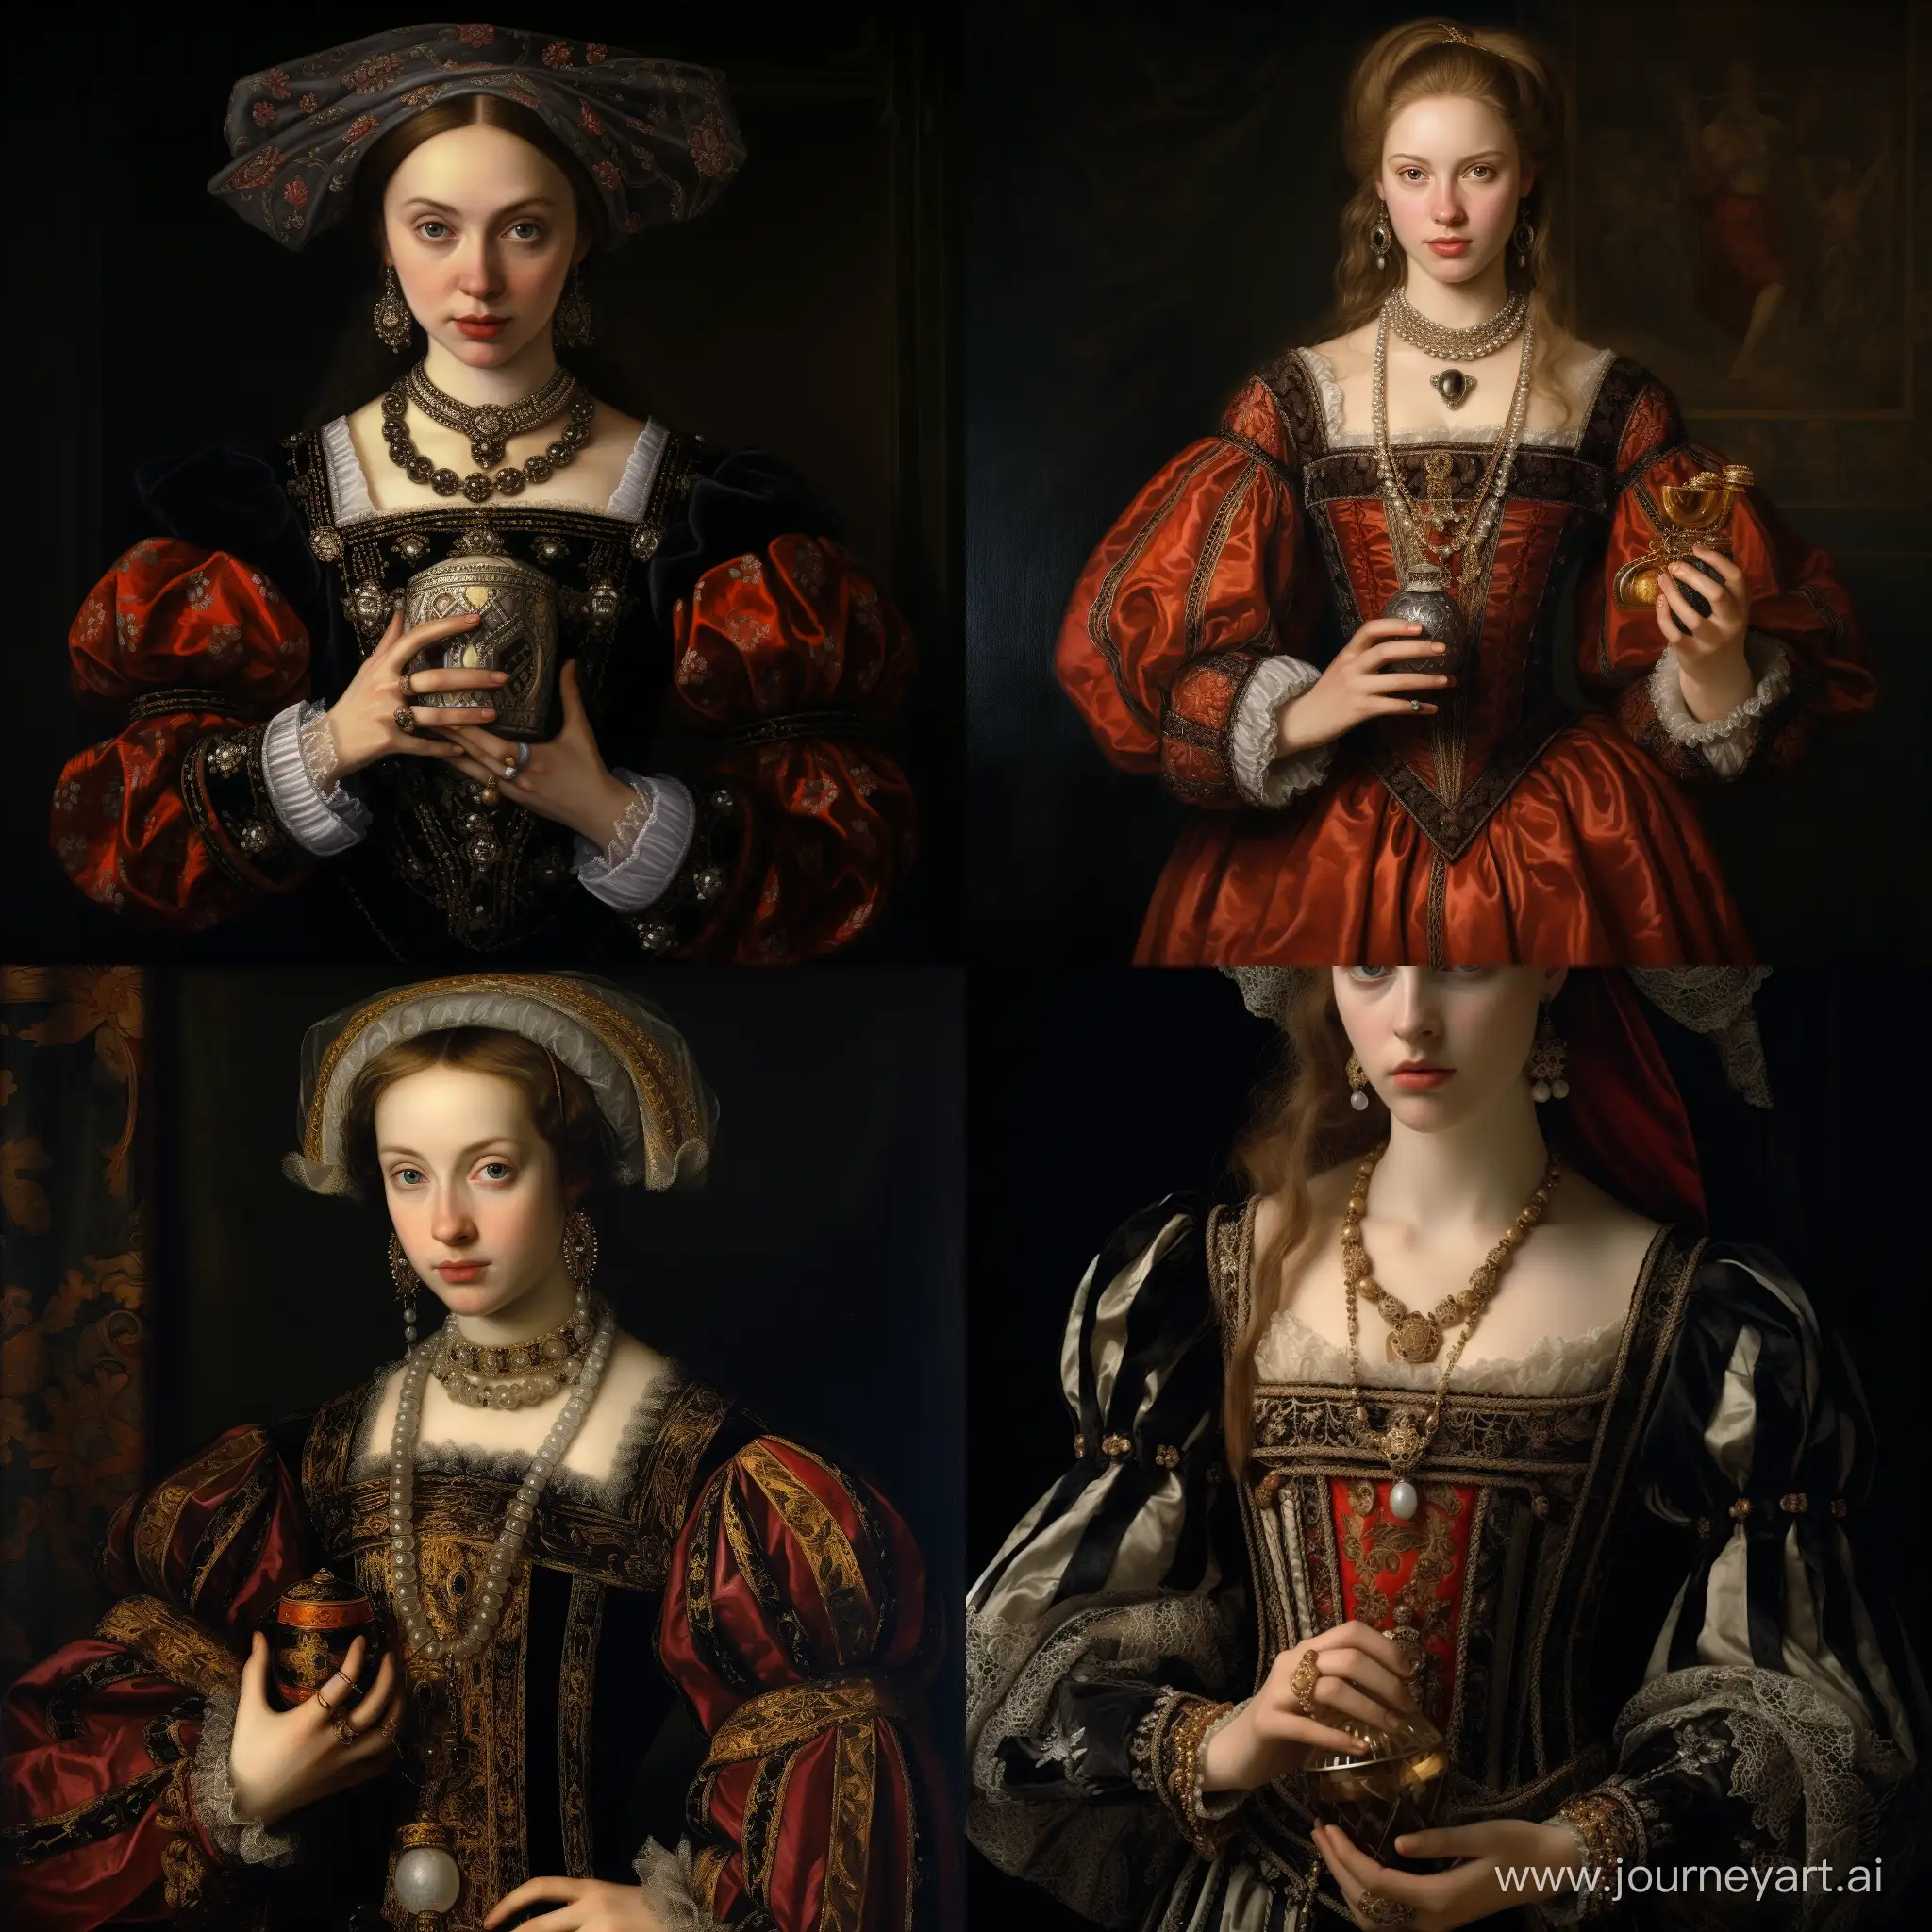 Elegant-16th-Century-Woman-with-Perfume-Bottle-in-11-Aspect-Ratio